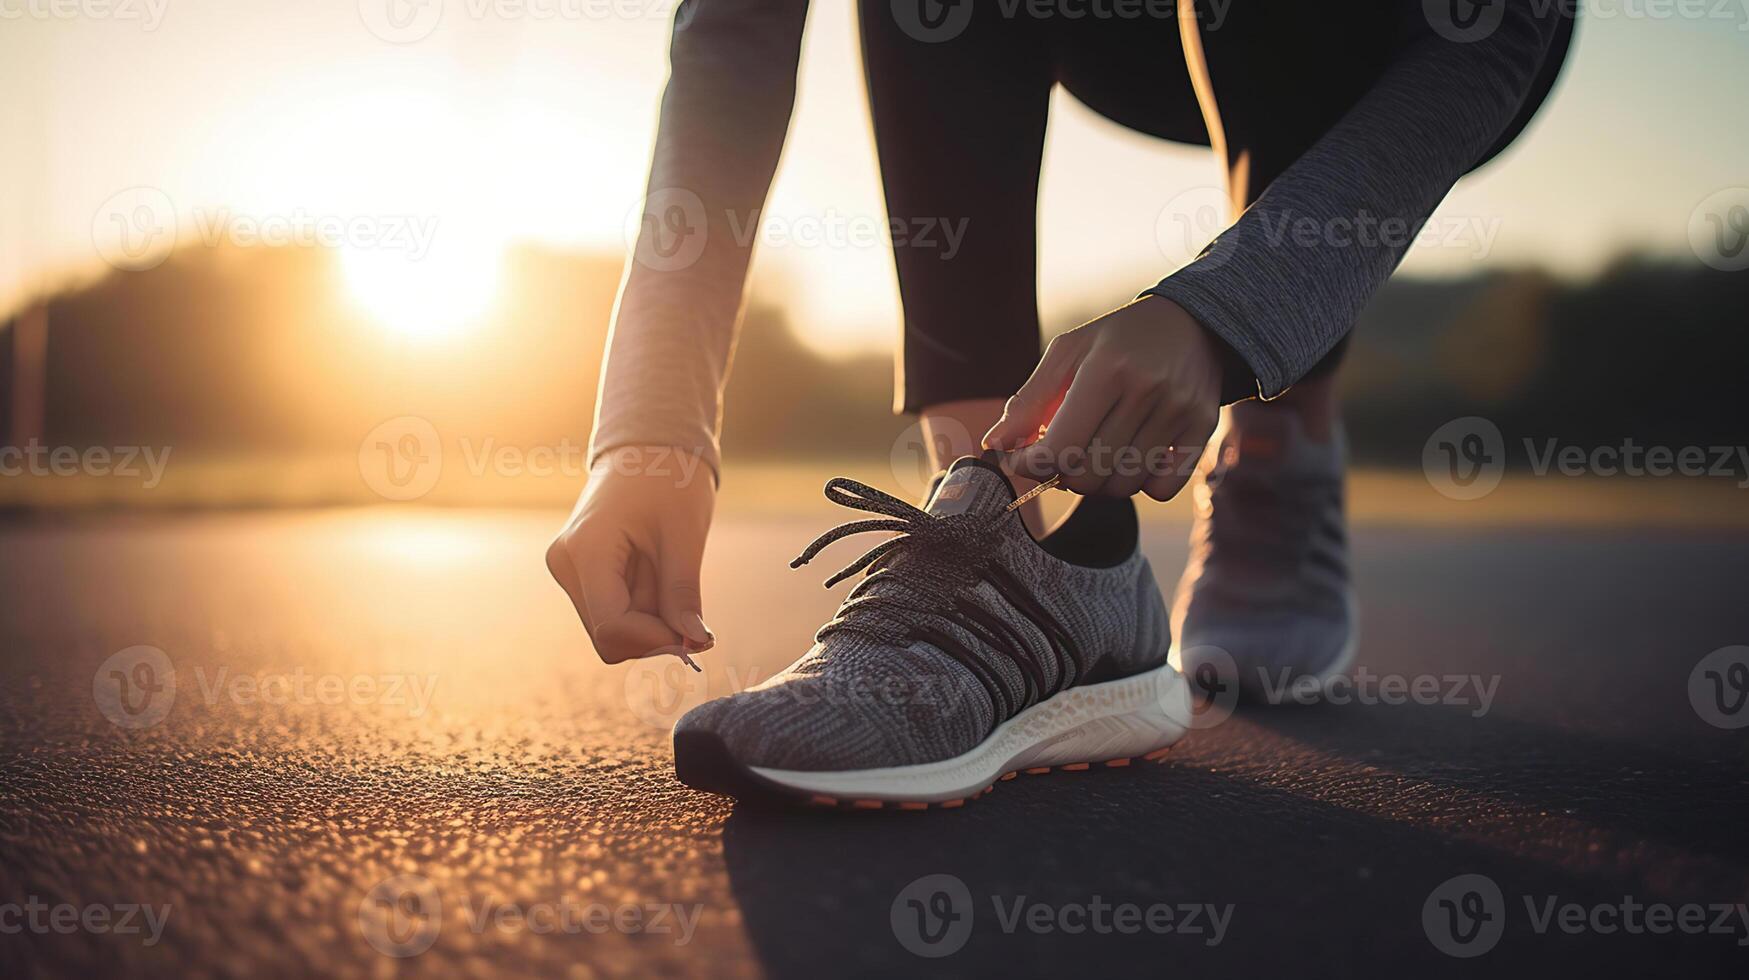 Runner Woman Tying Her Shoelaces While Jogging - Sport And Fitness At Sunset, photo